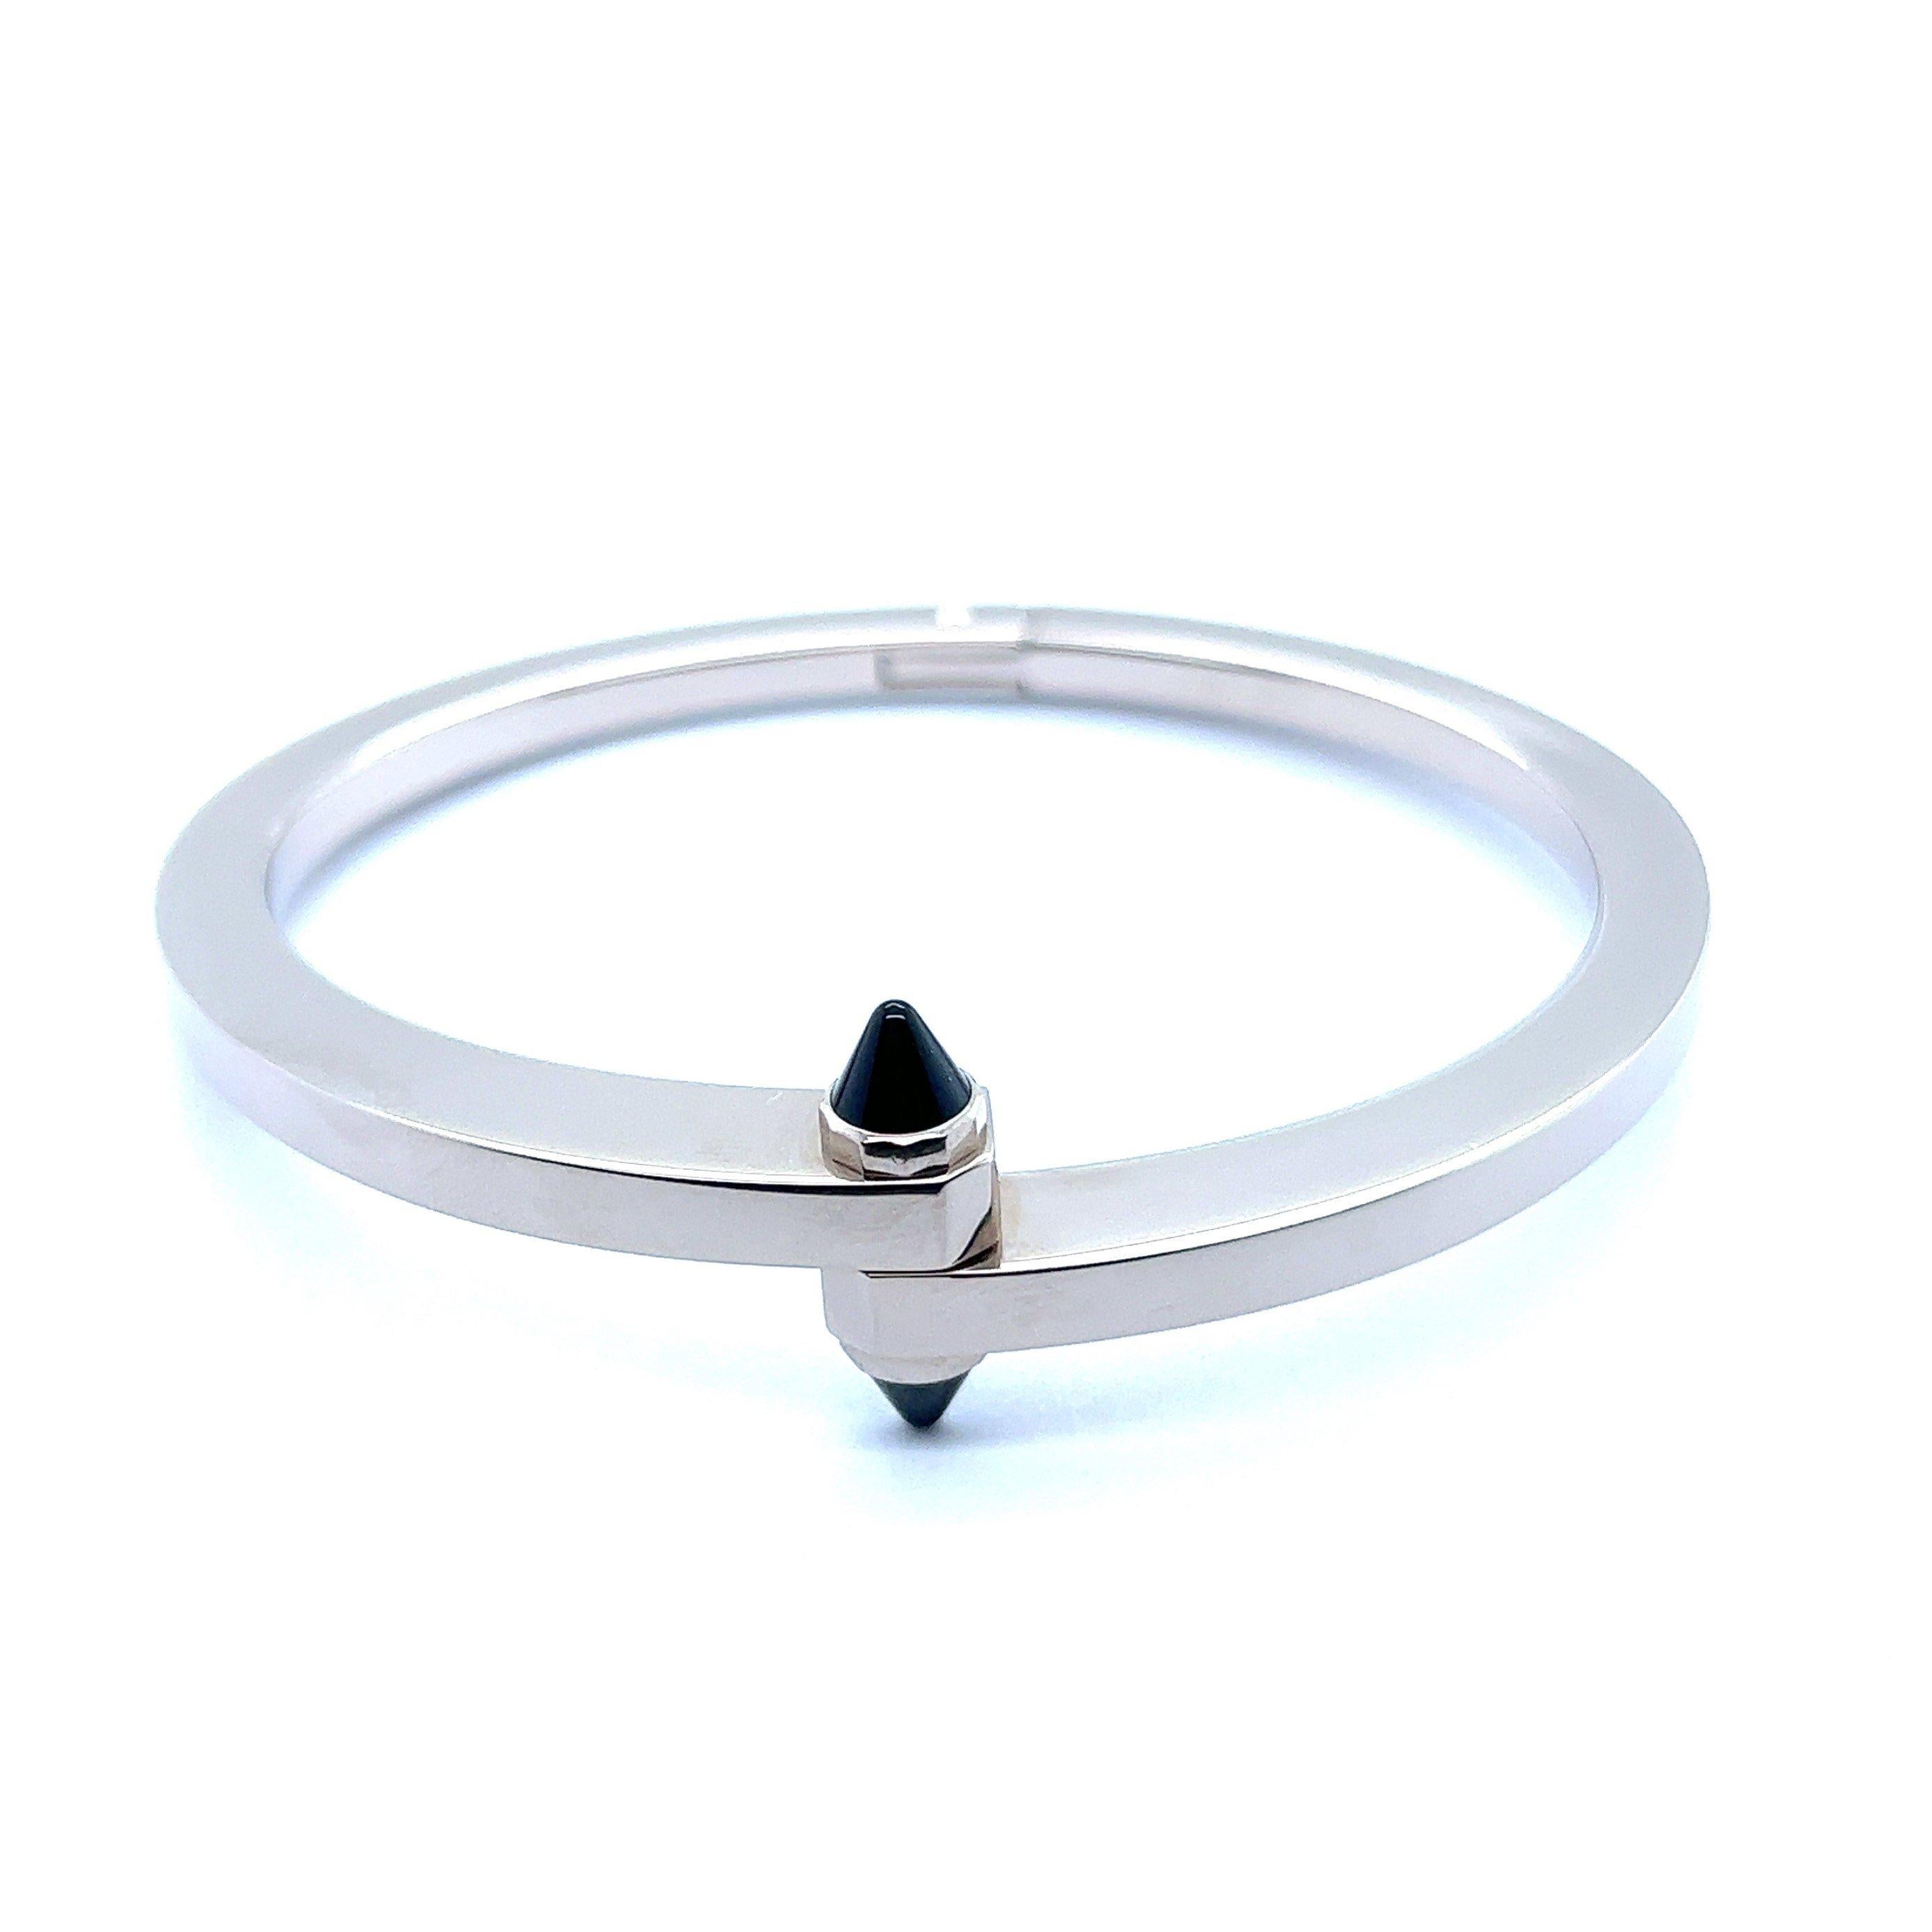 A truly rare find for connoisseurs and discerning collectors – unique bracelet from Menotte collection created by the luxury French jeweler Cartier. This sleek bangle is crafted in 18 Karat white gold and adorned with two bullet-cut onyx. It is